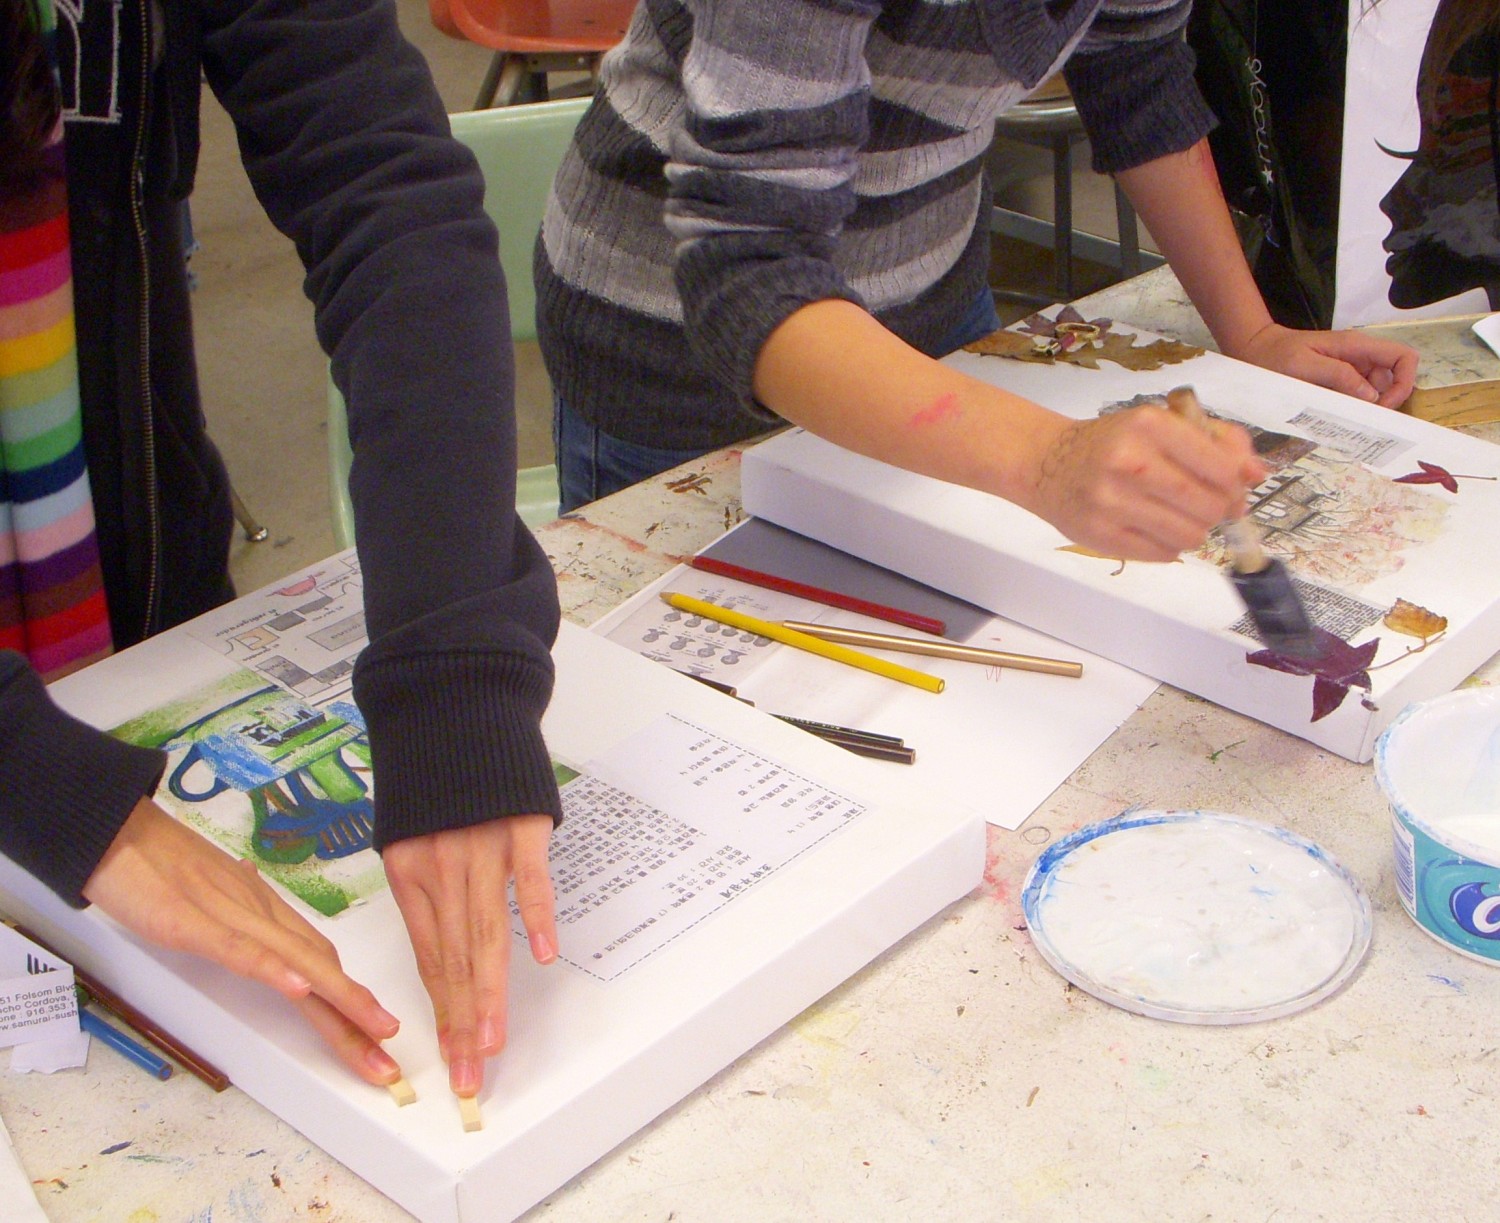 students in a high school art class working on mixed media artworks